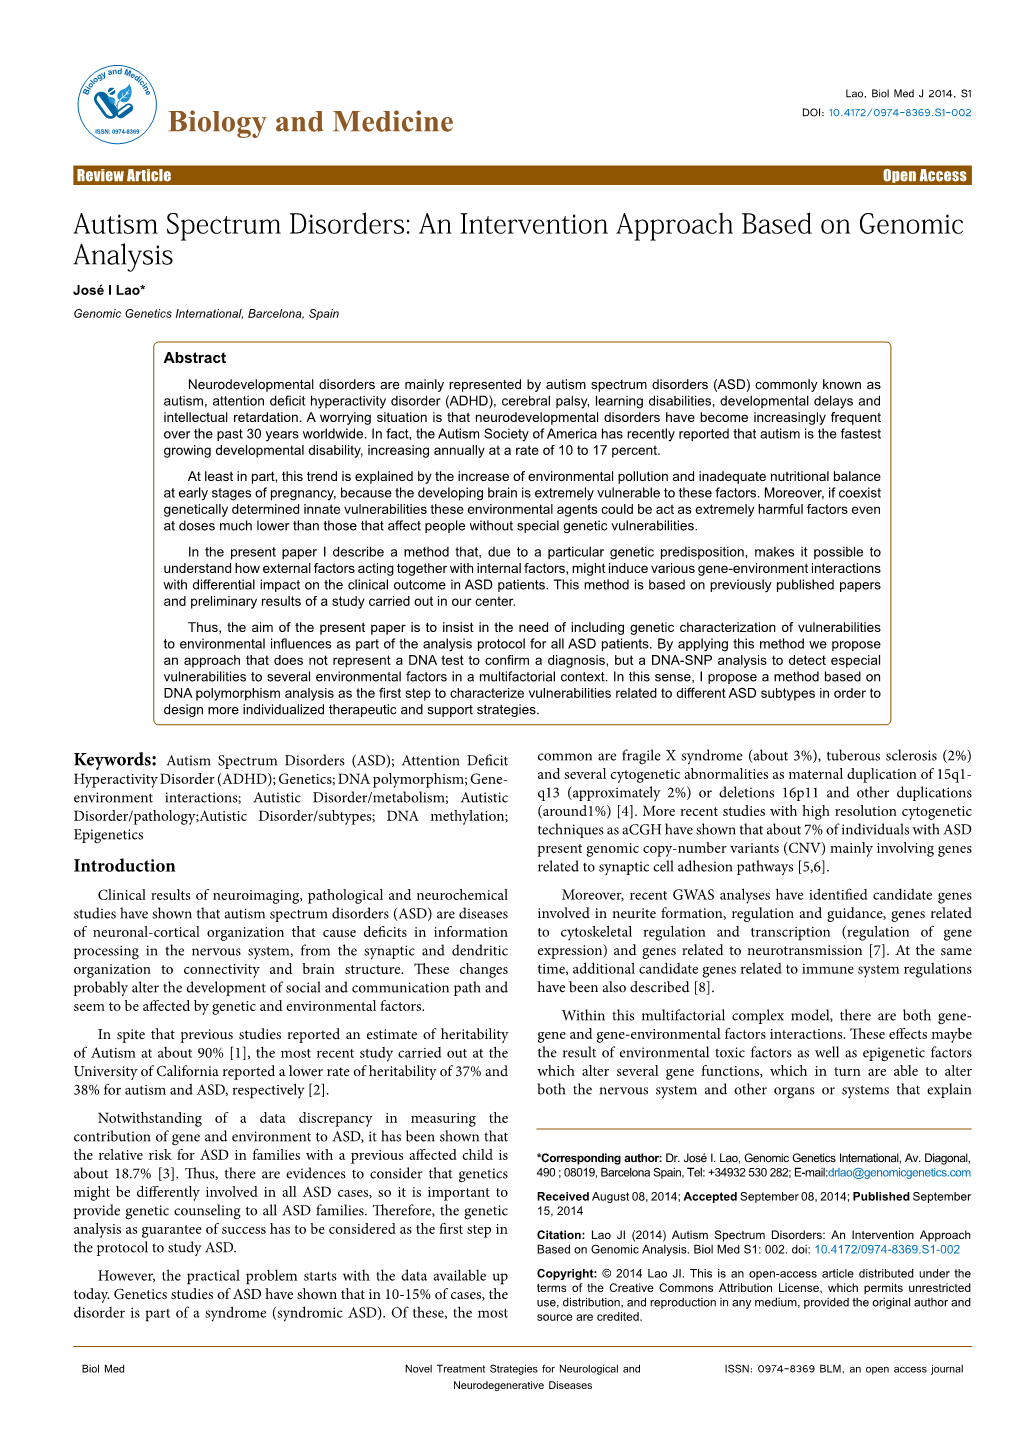 Autism Spectrum Disorders: an Intervention Approach Based on Genomic Analysis